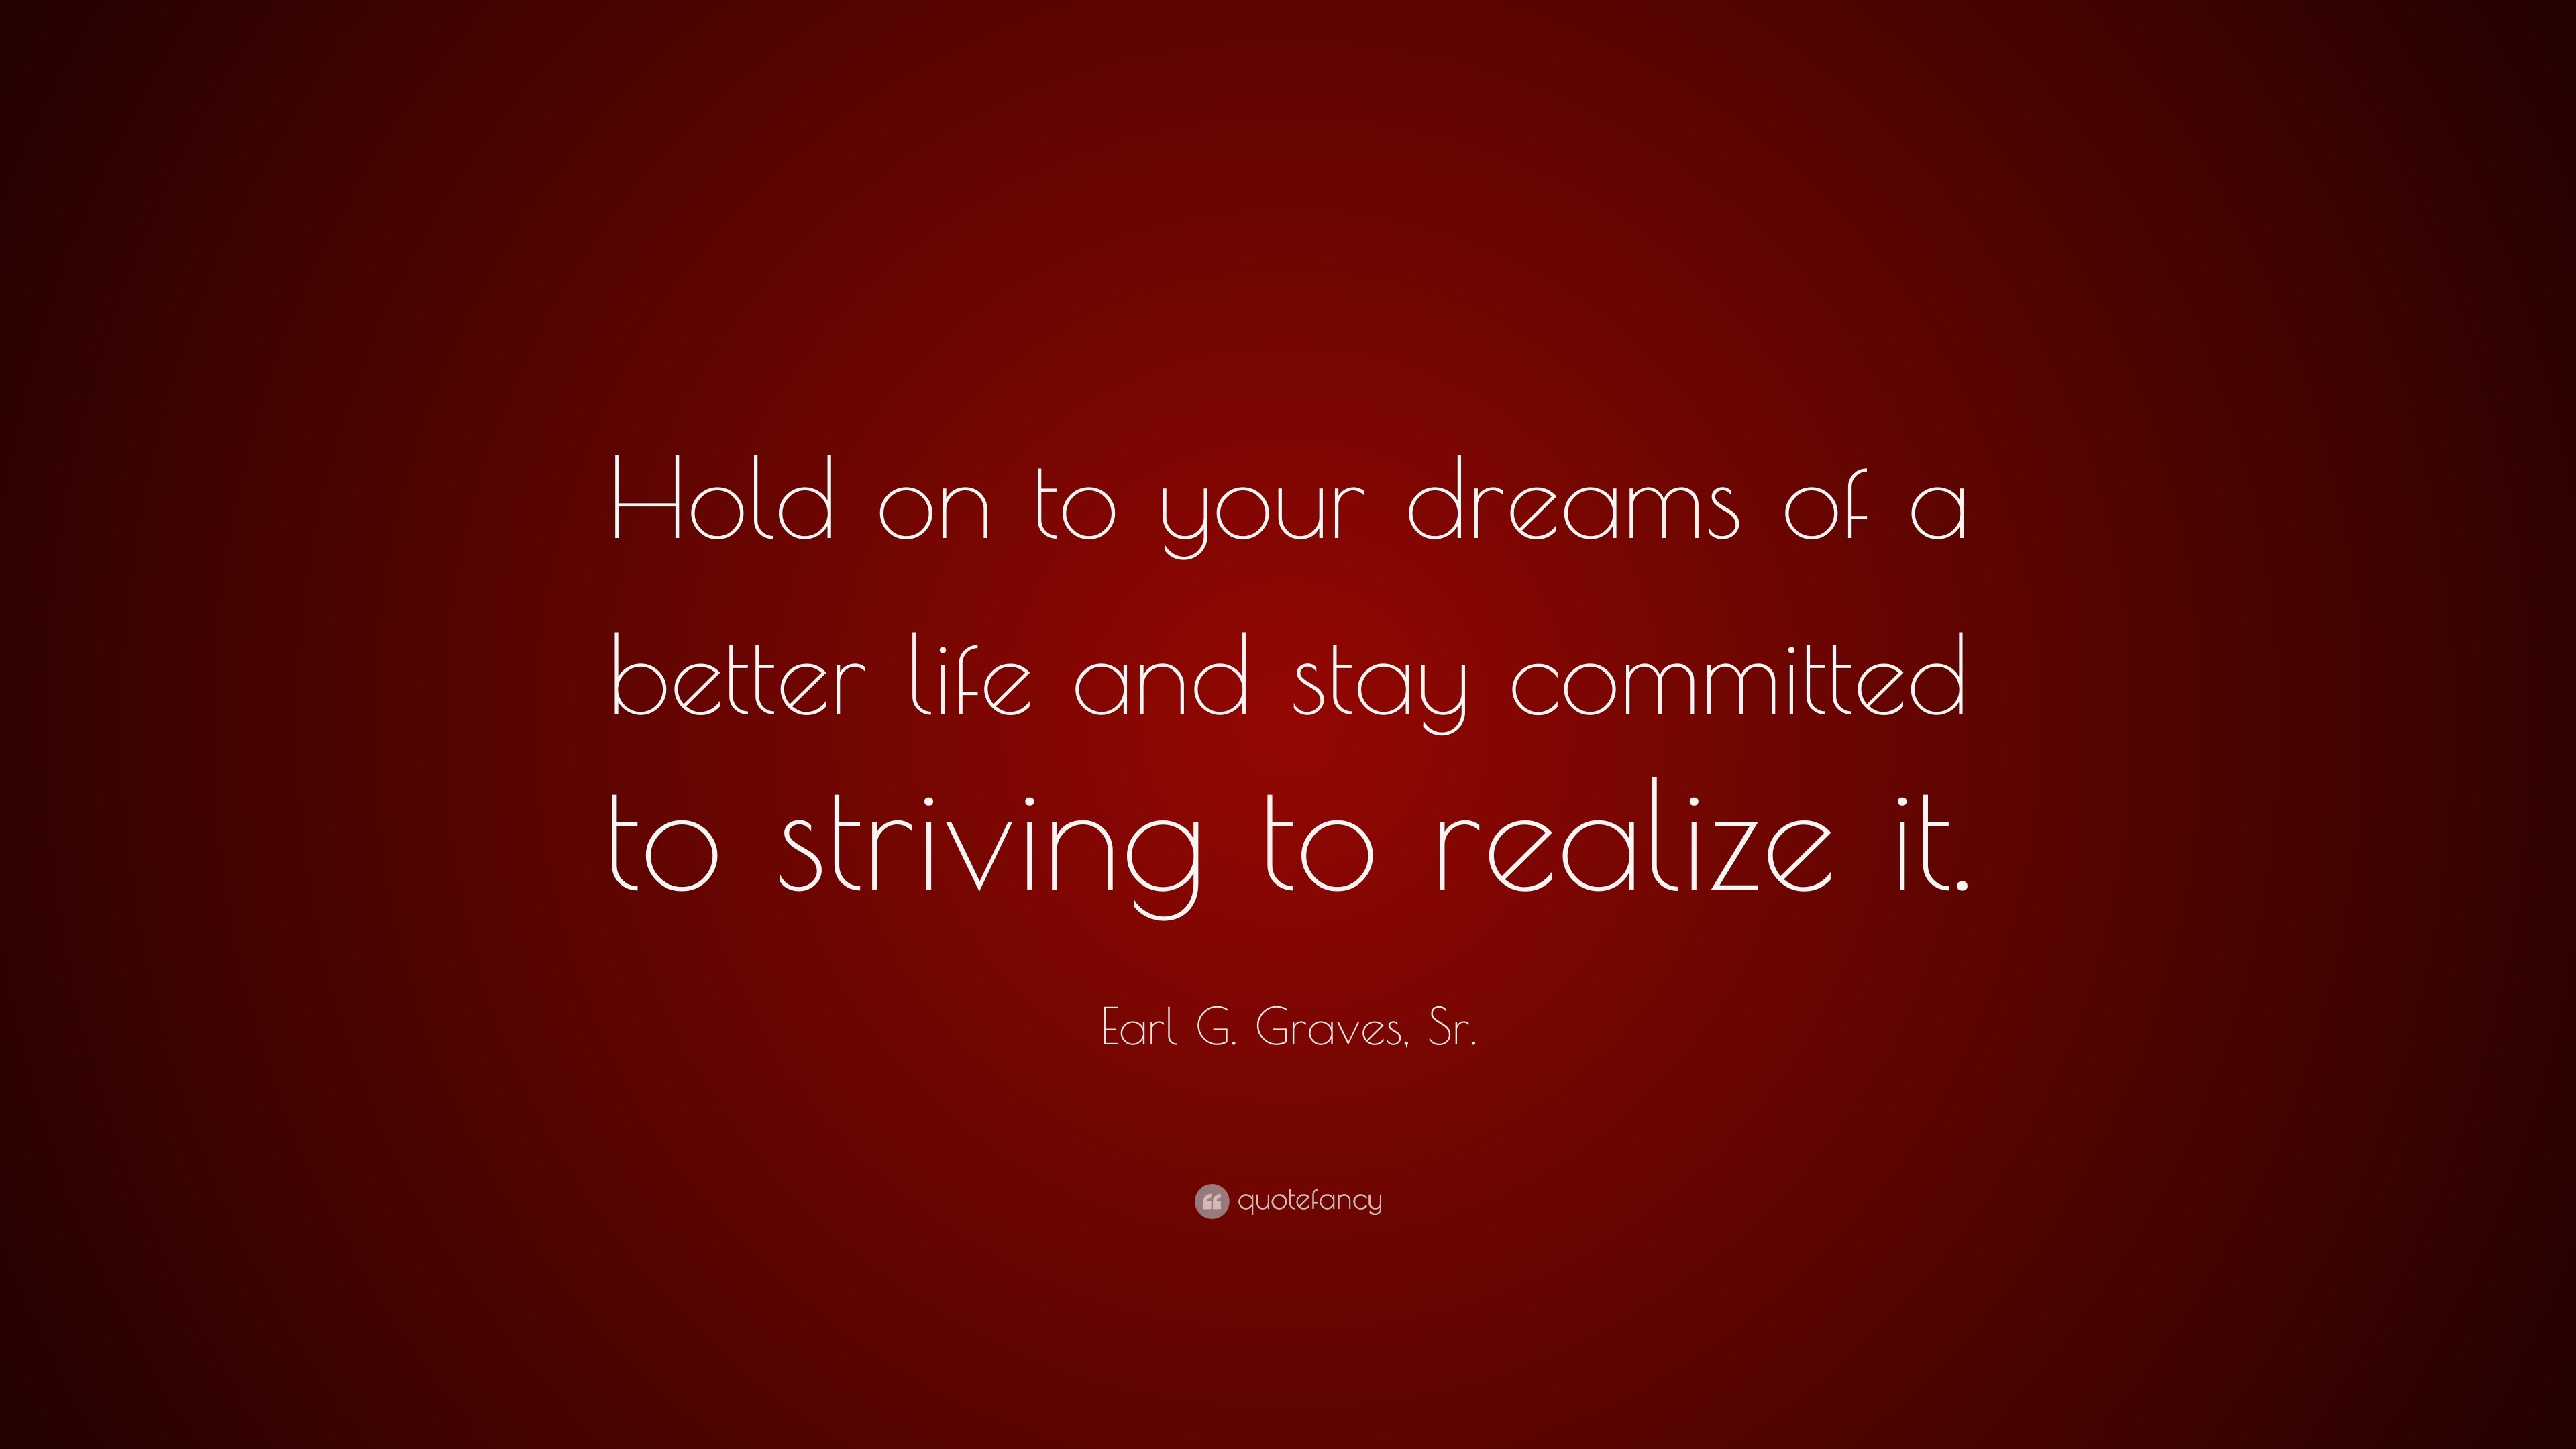 Earl G Graves Sr Quote “Hold on to your dreams of